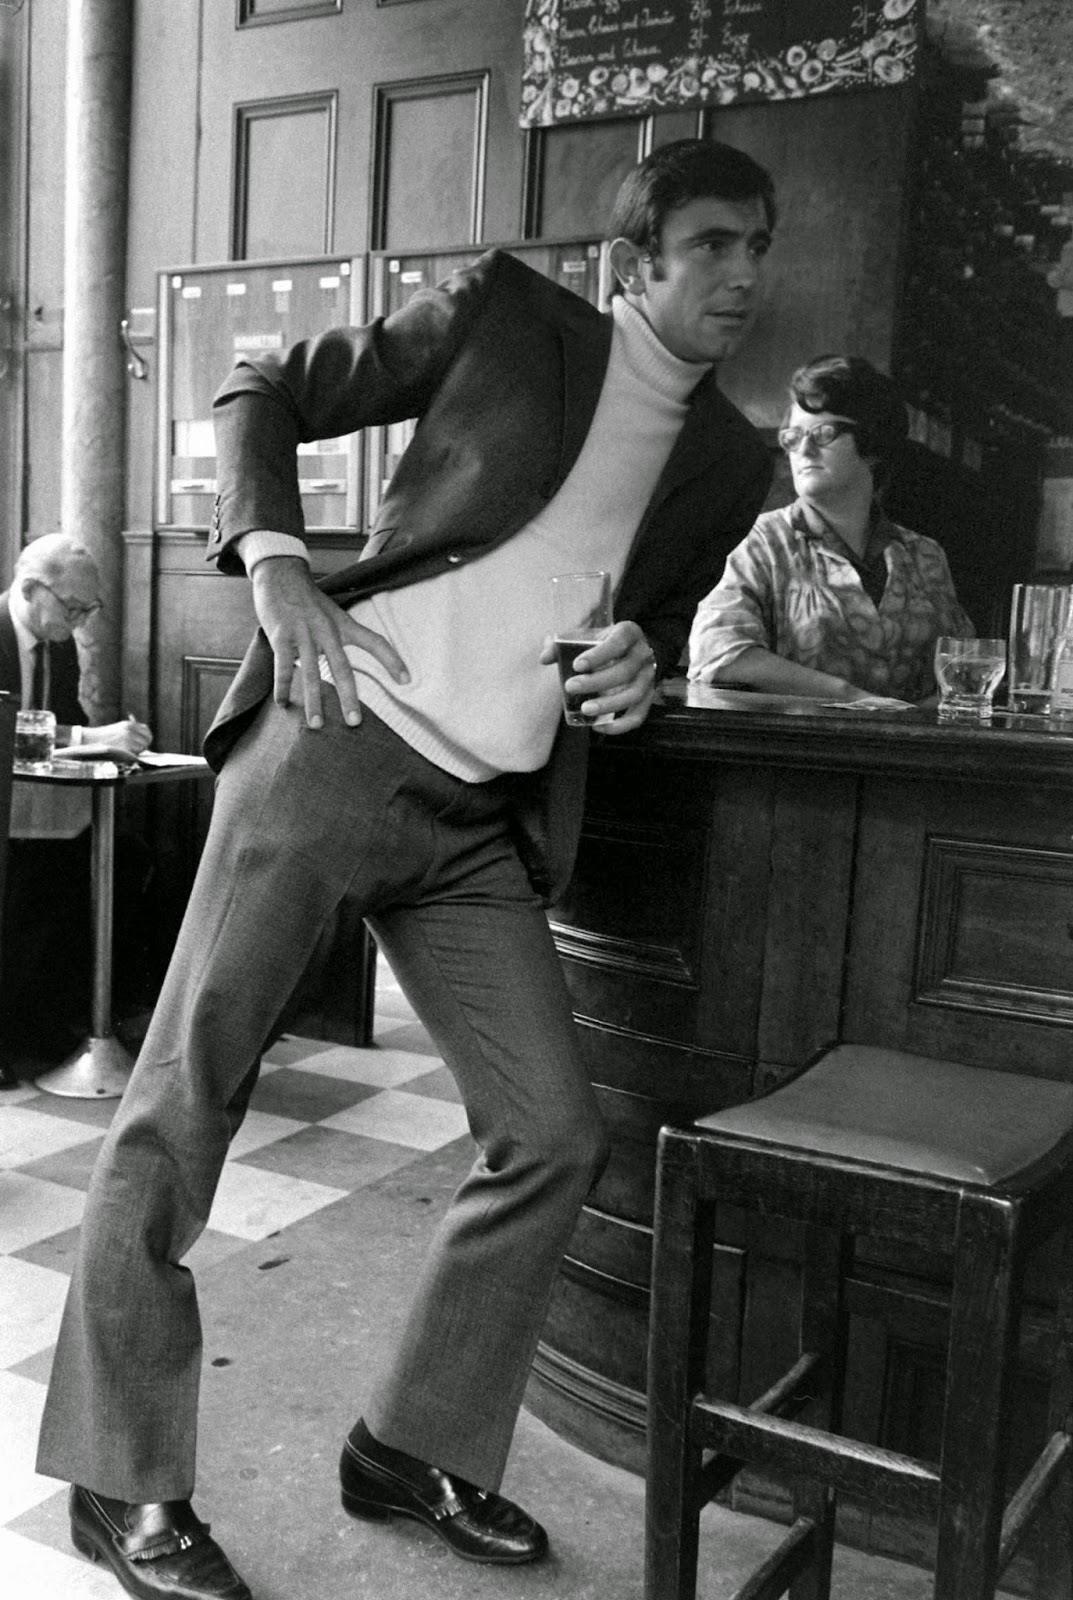 George Lazenby leans against a bar during a moment away from James Bond auditions, 1967.